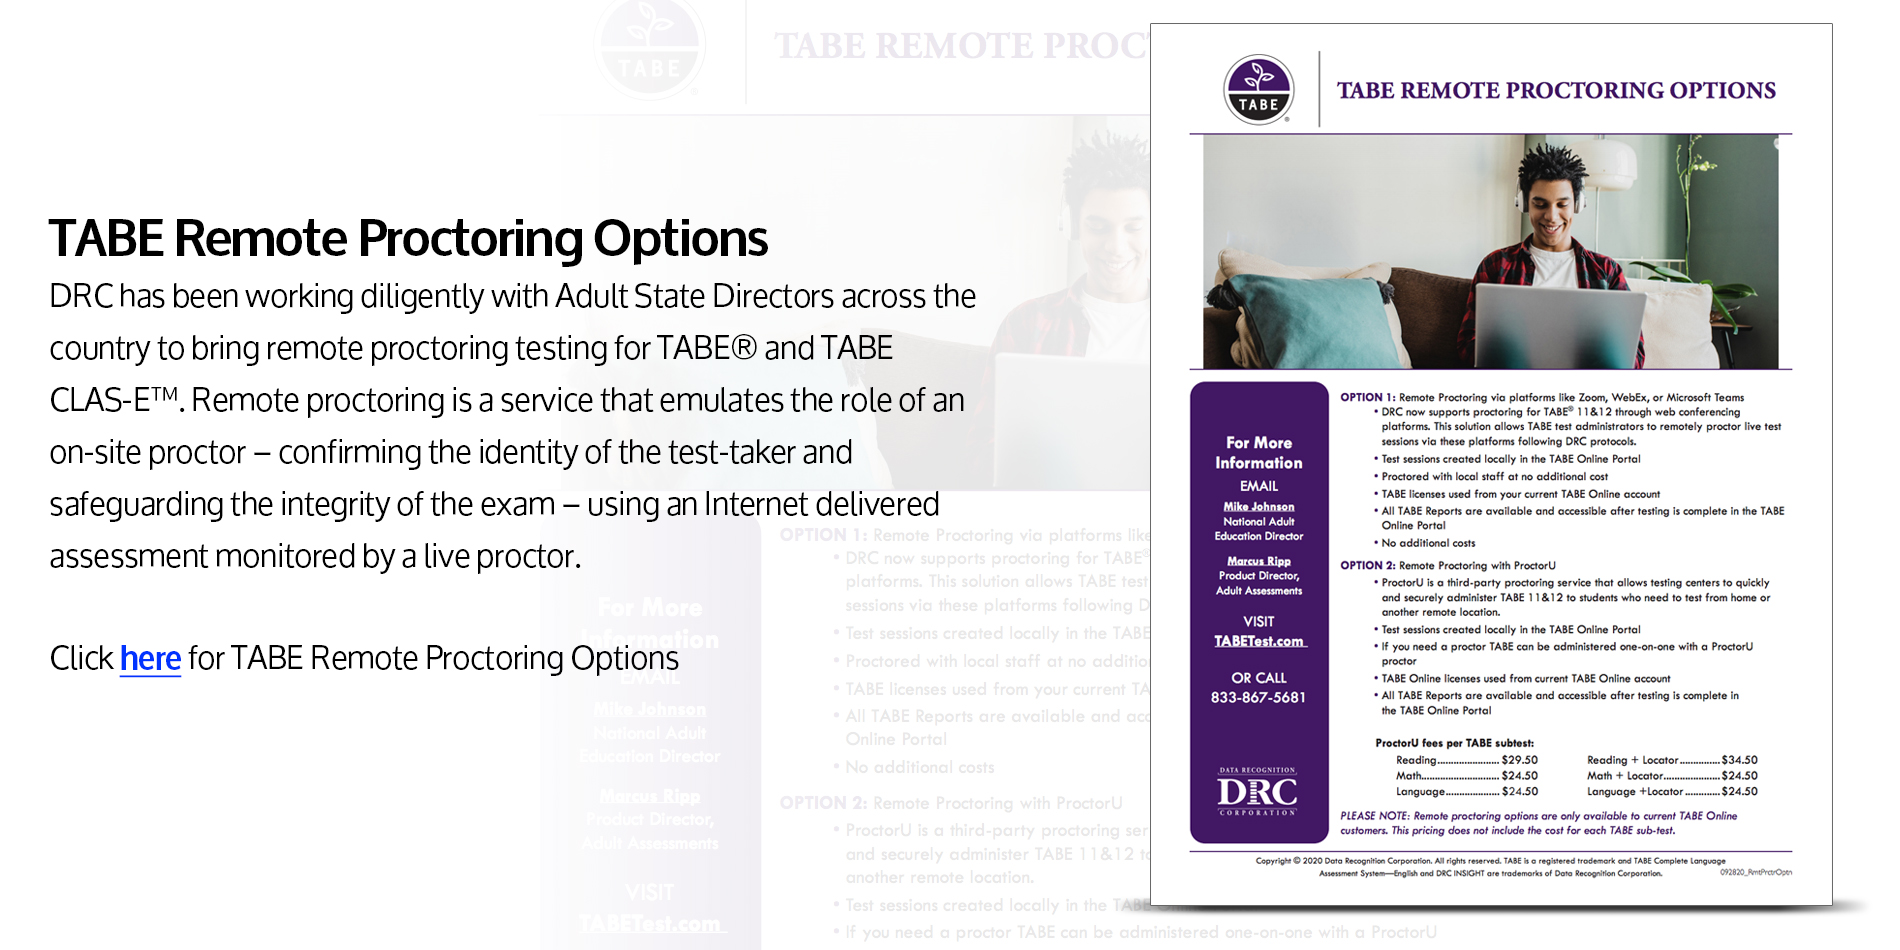 TABE Remote Proctoring Options